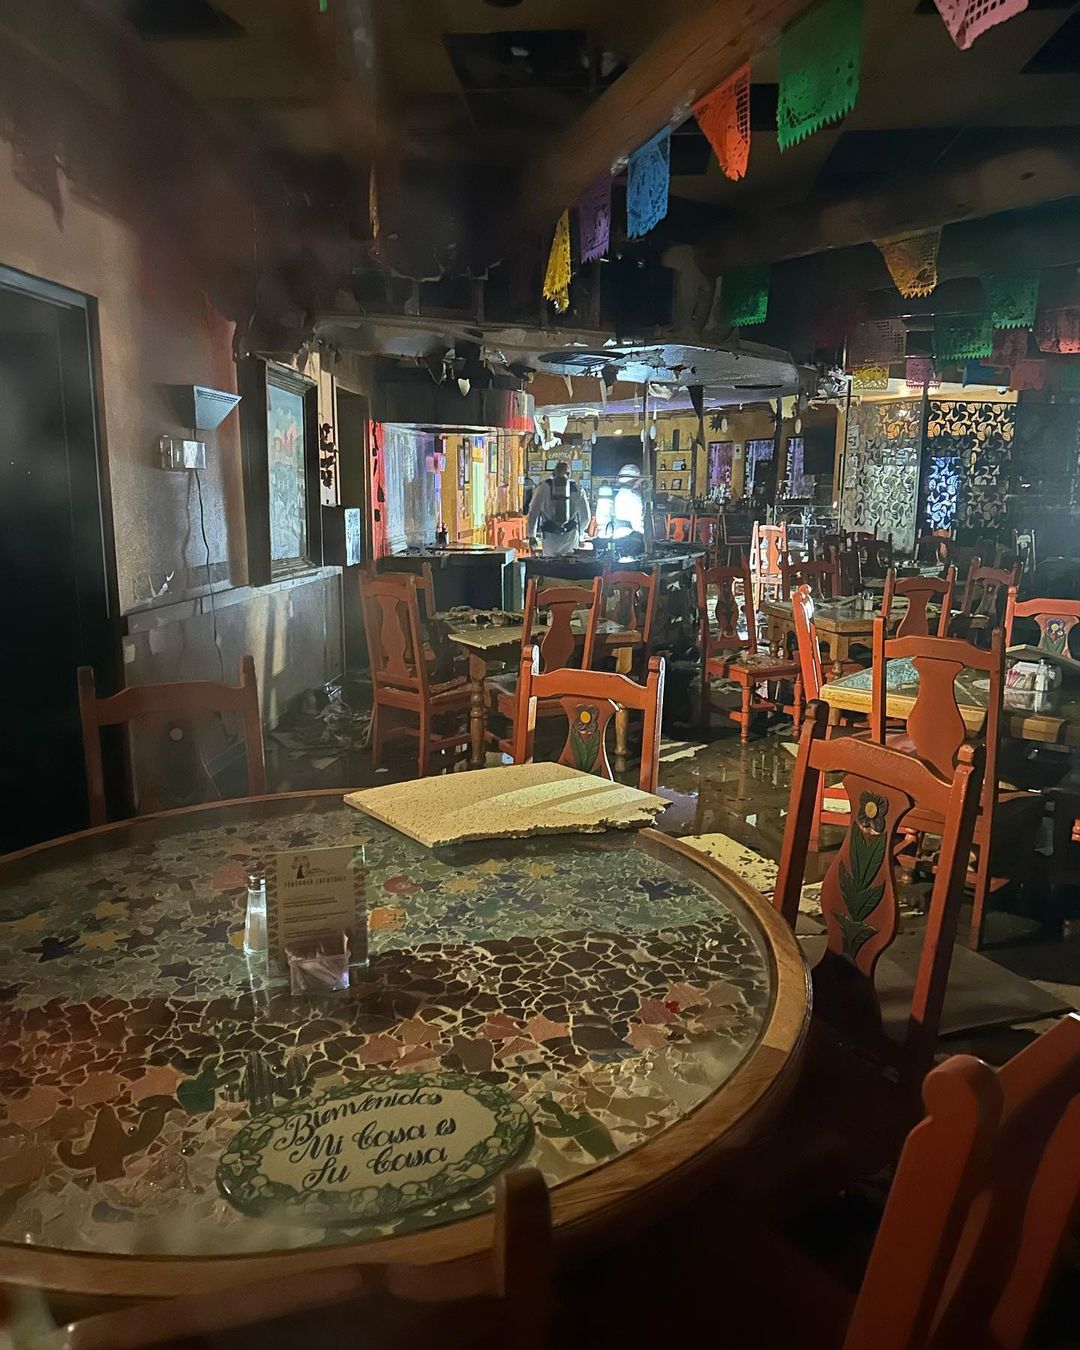 Fire damage at Teresa's Mosaic Cafe (Photo courtesy of Tucson Fire Departmen)